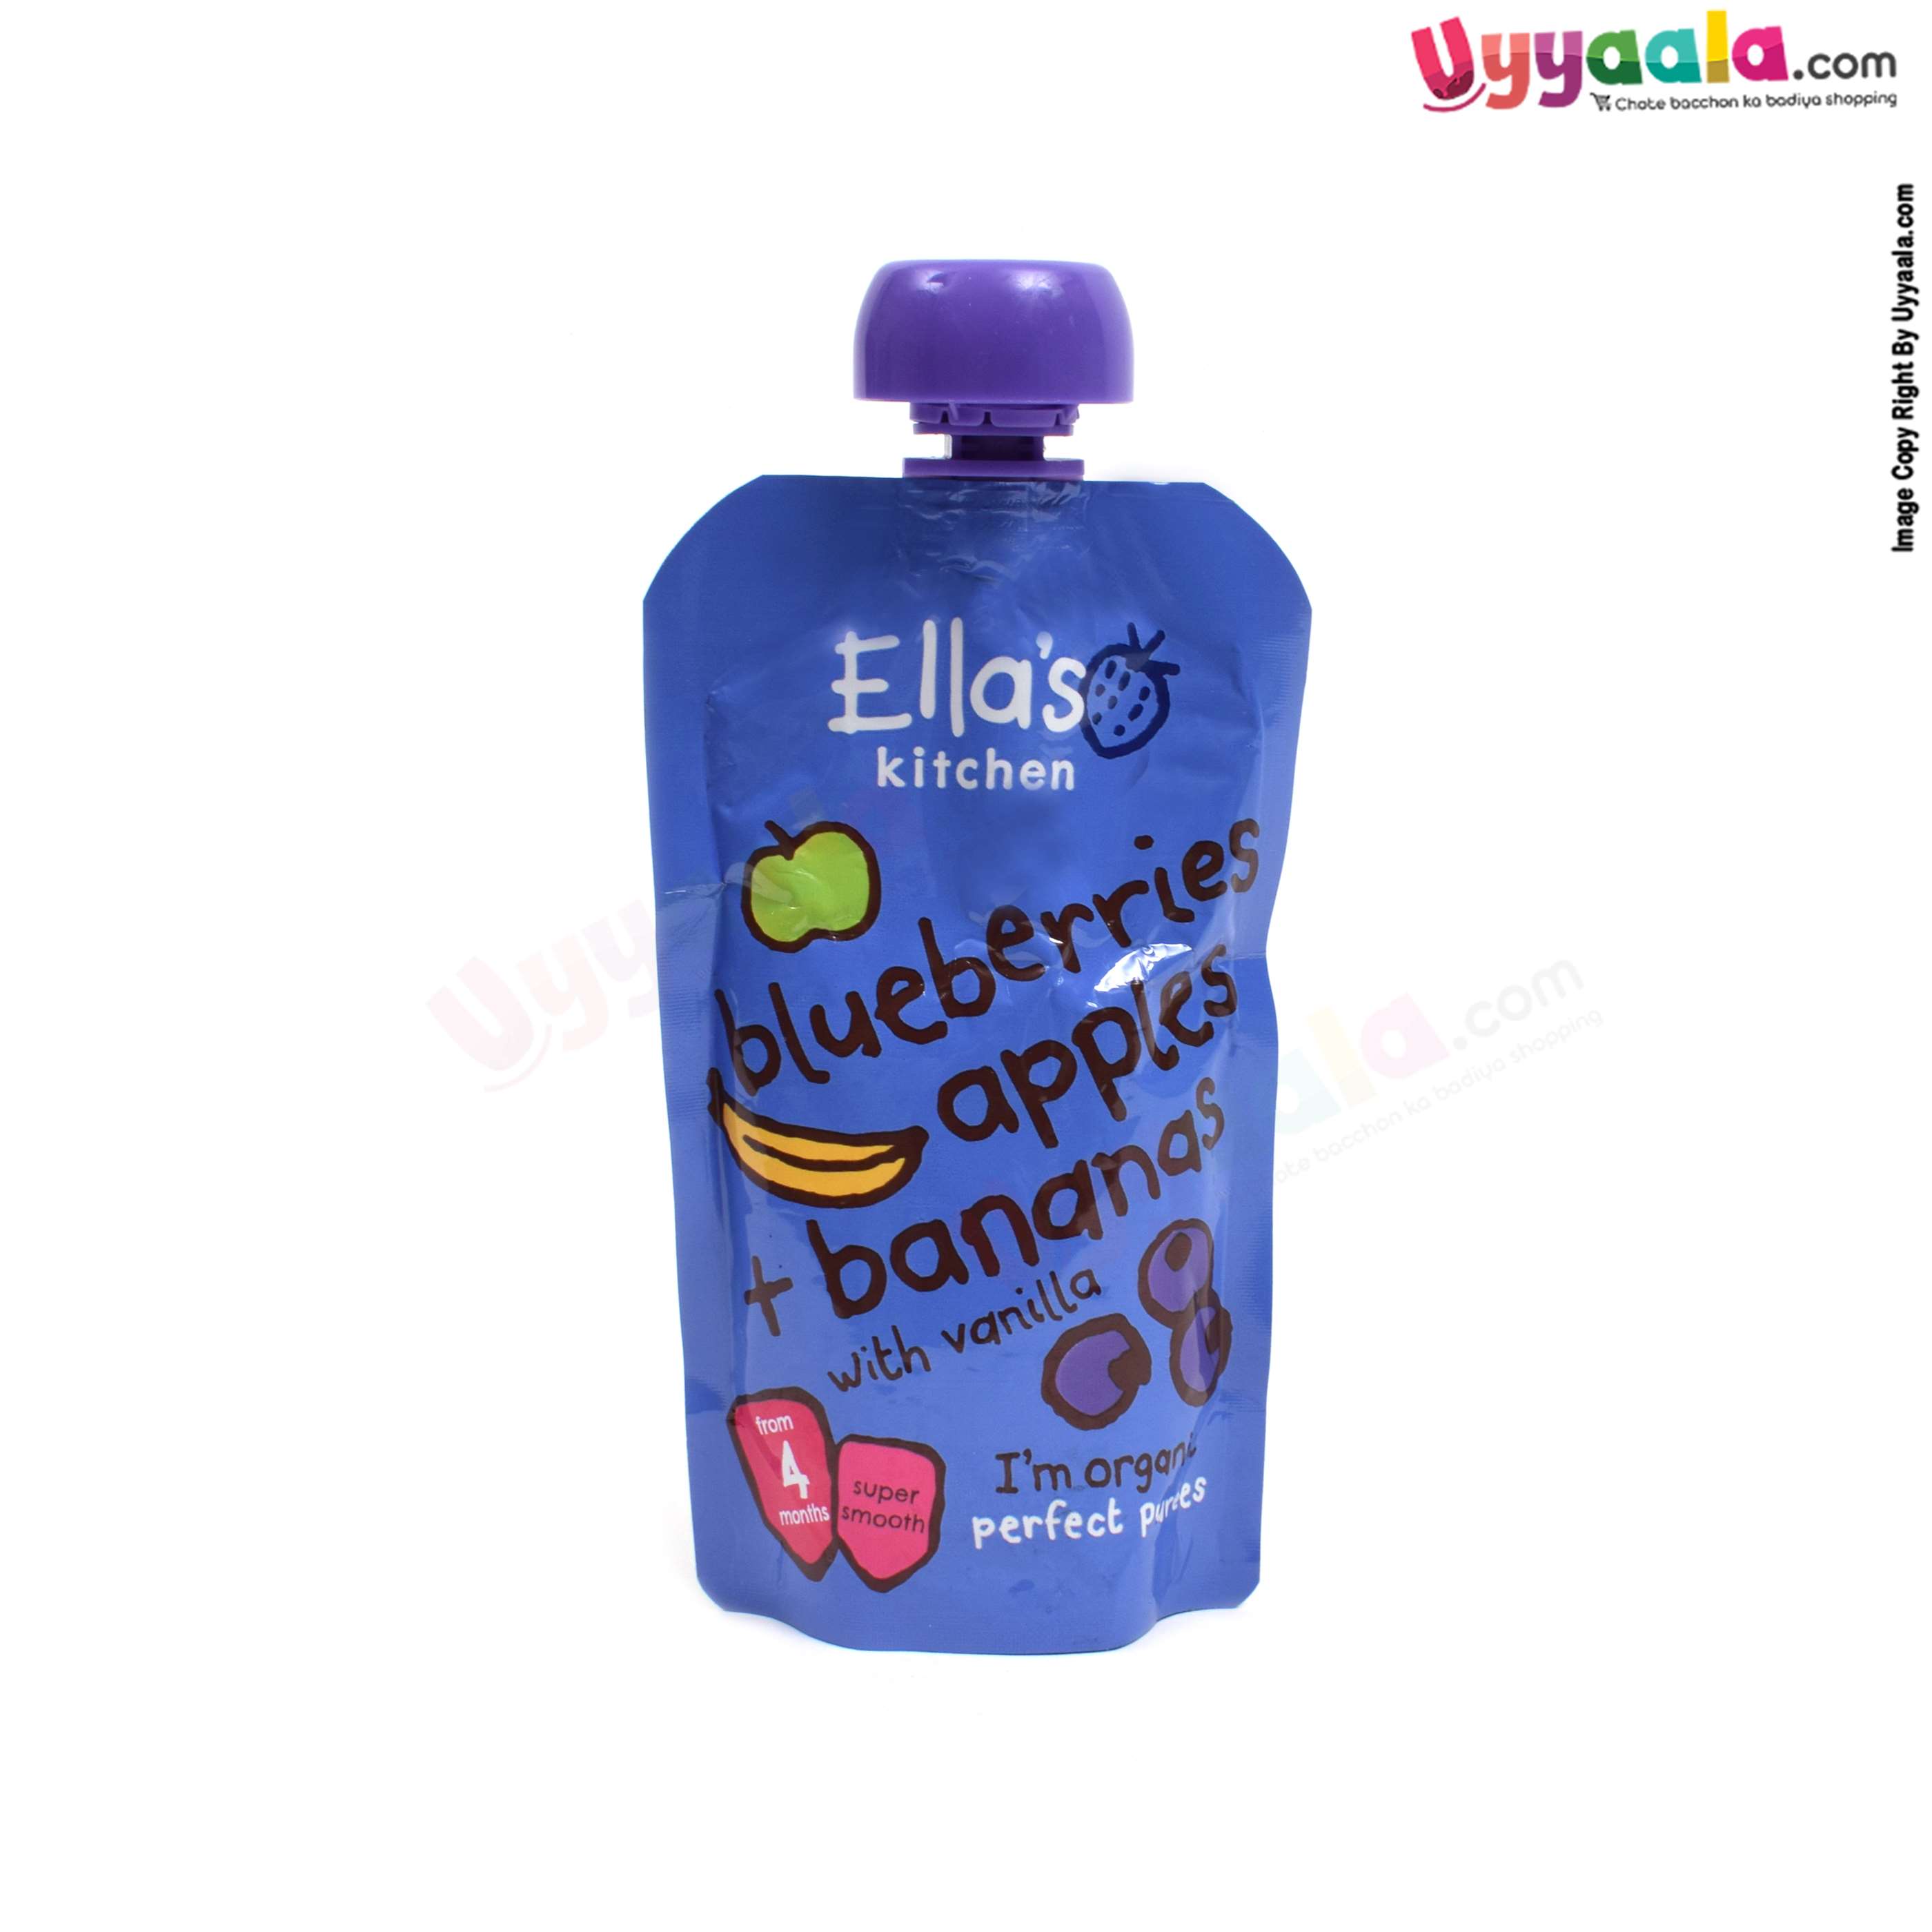 ELLA'S KITCHEN Blueberries apples + bananas super smooth purees for babies - 120gm, 4 months +